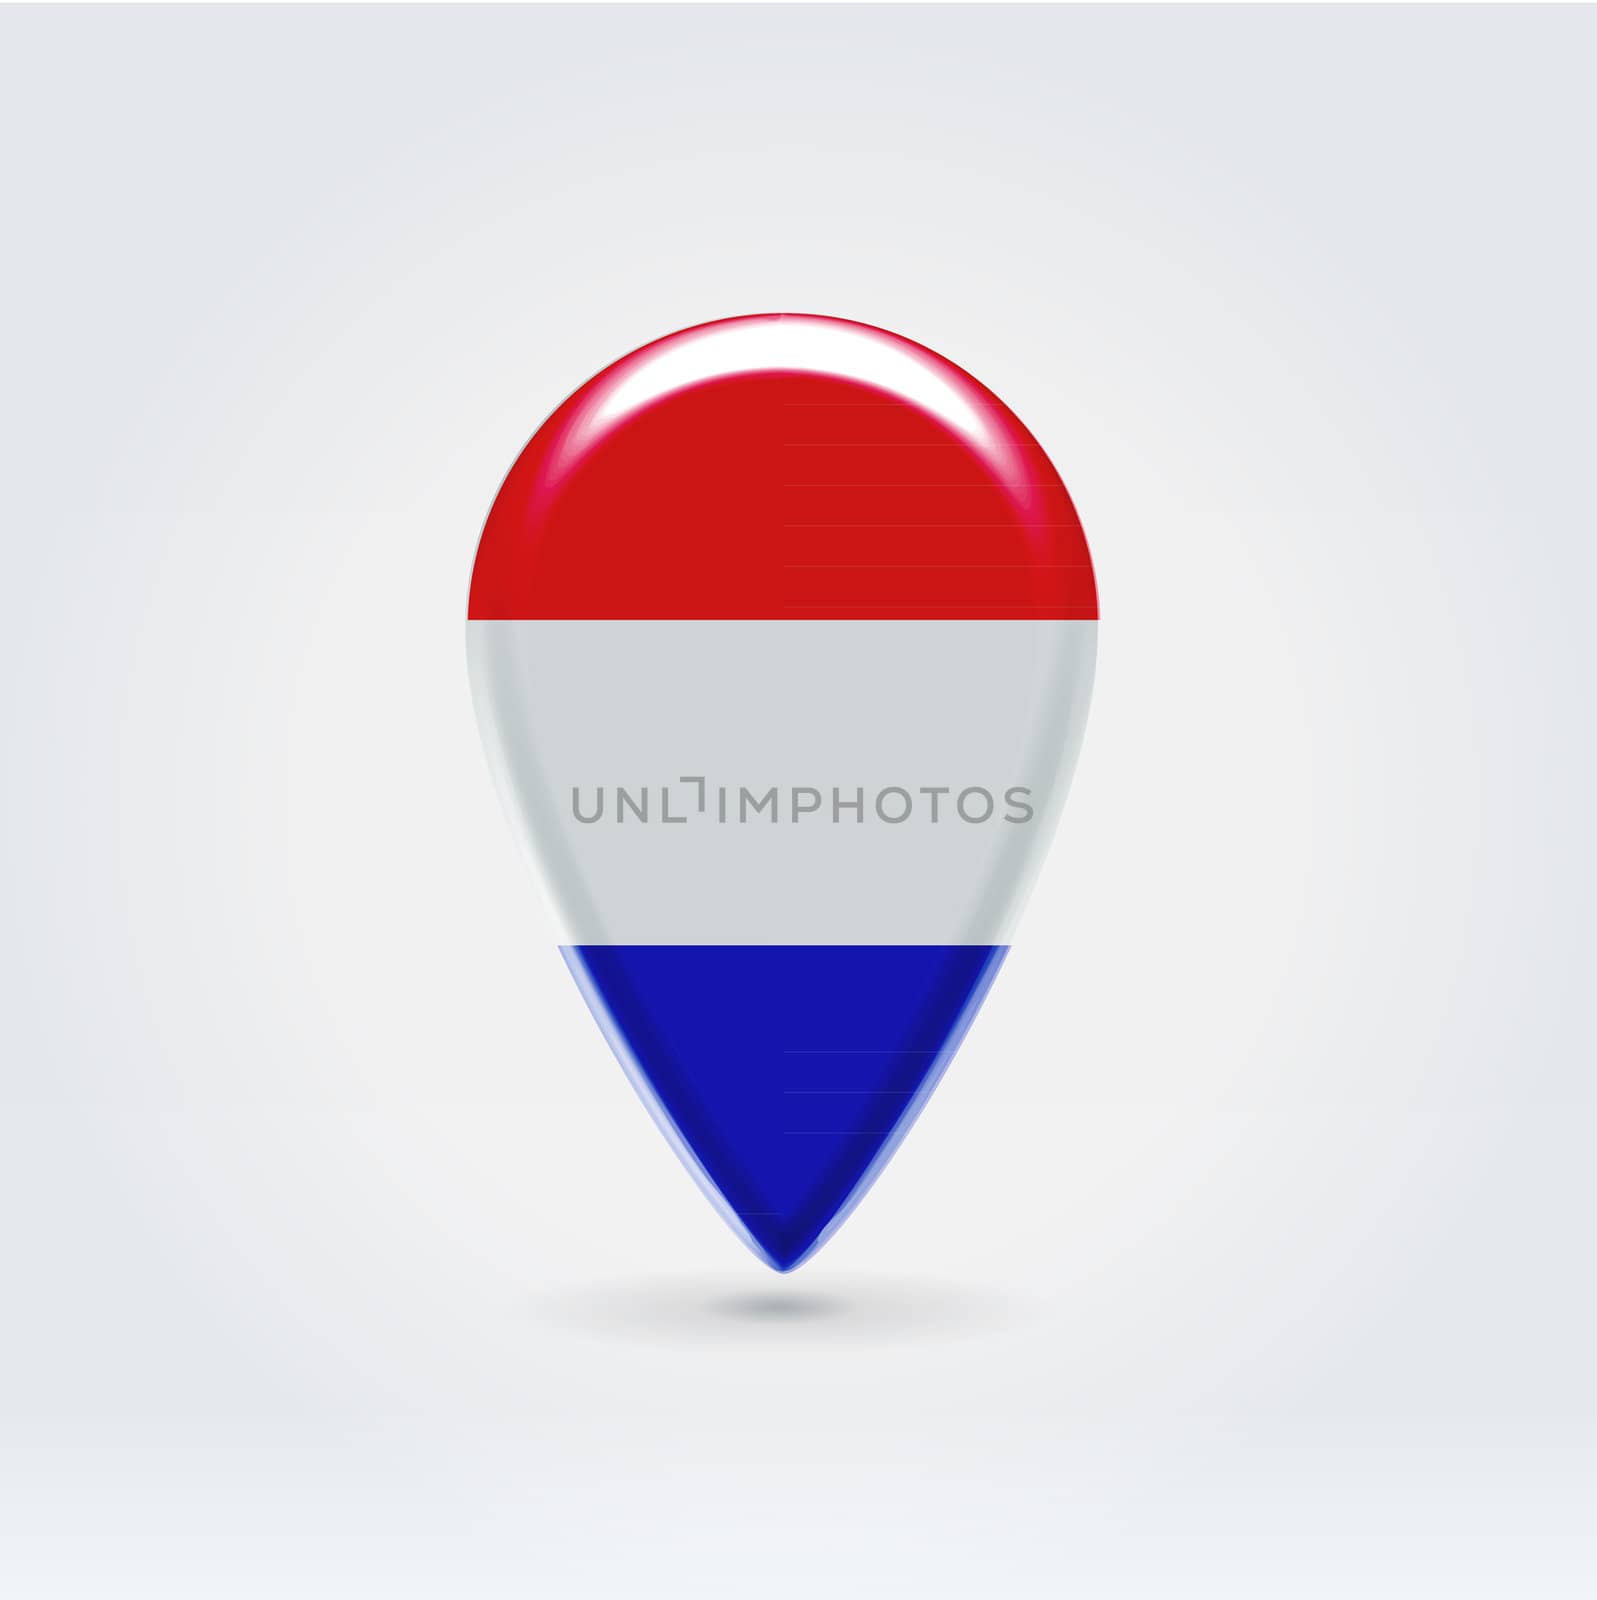 Glossy colorful Luxembourg  map application point label symbol hanging over enlighted background
